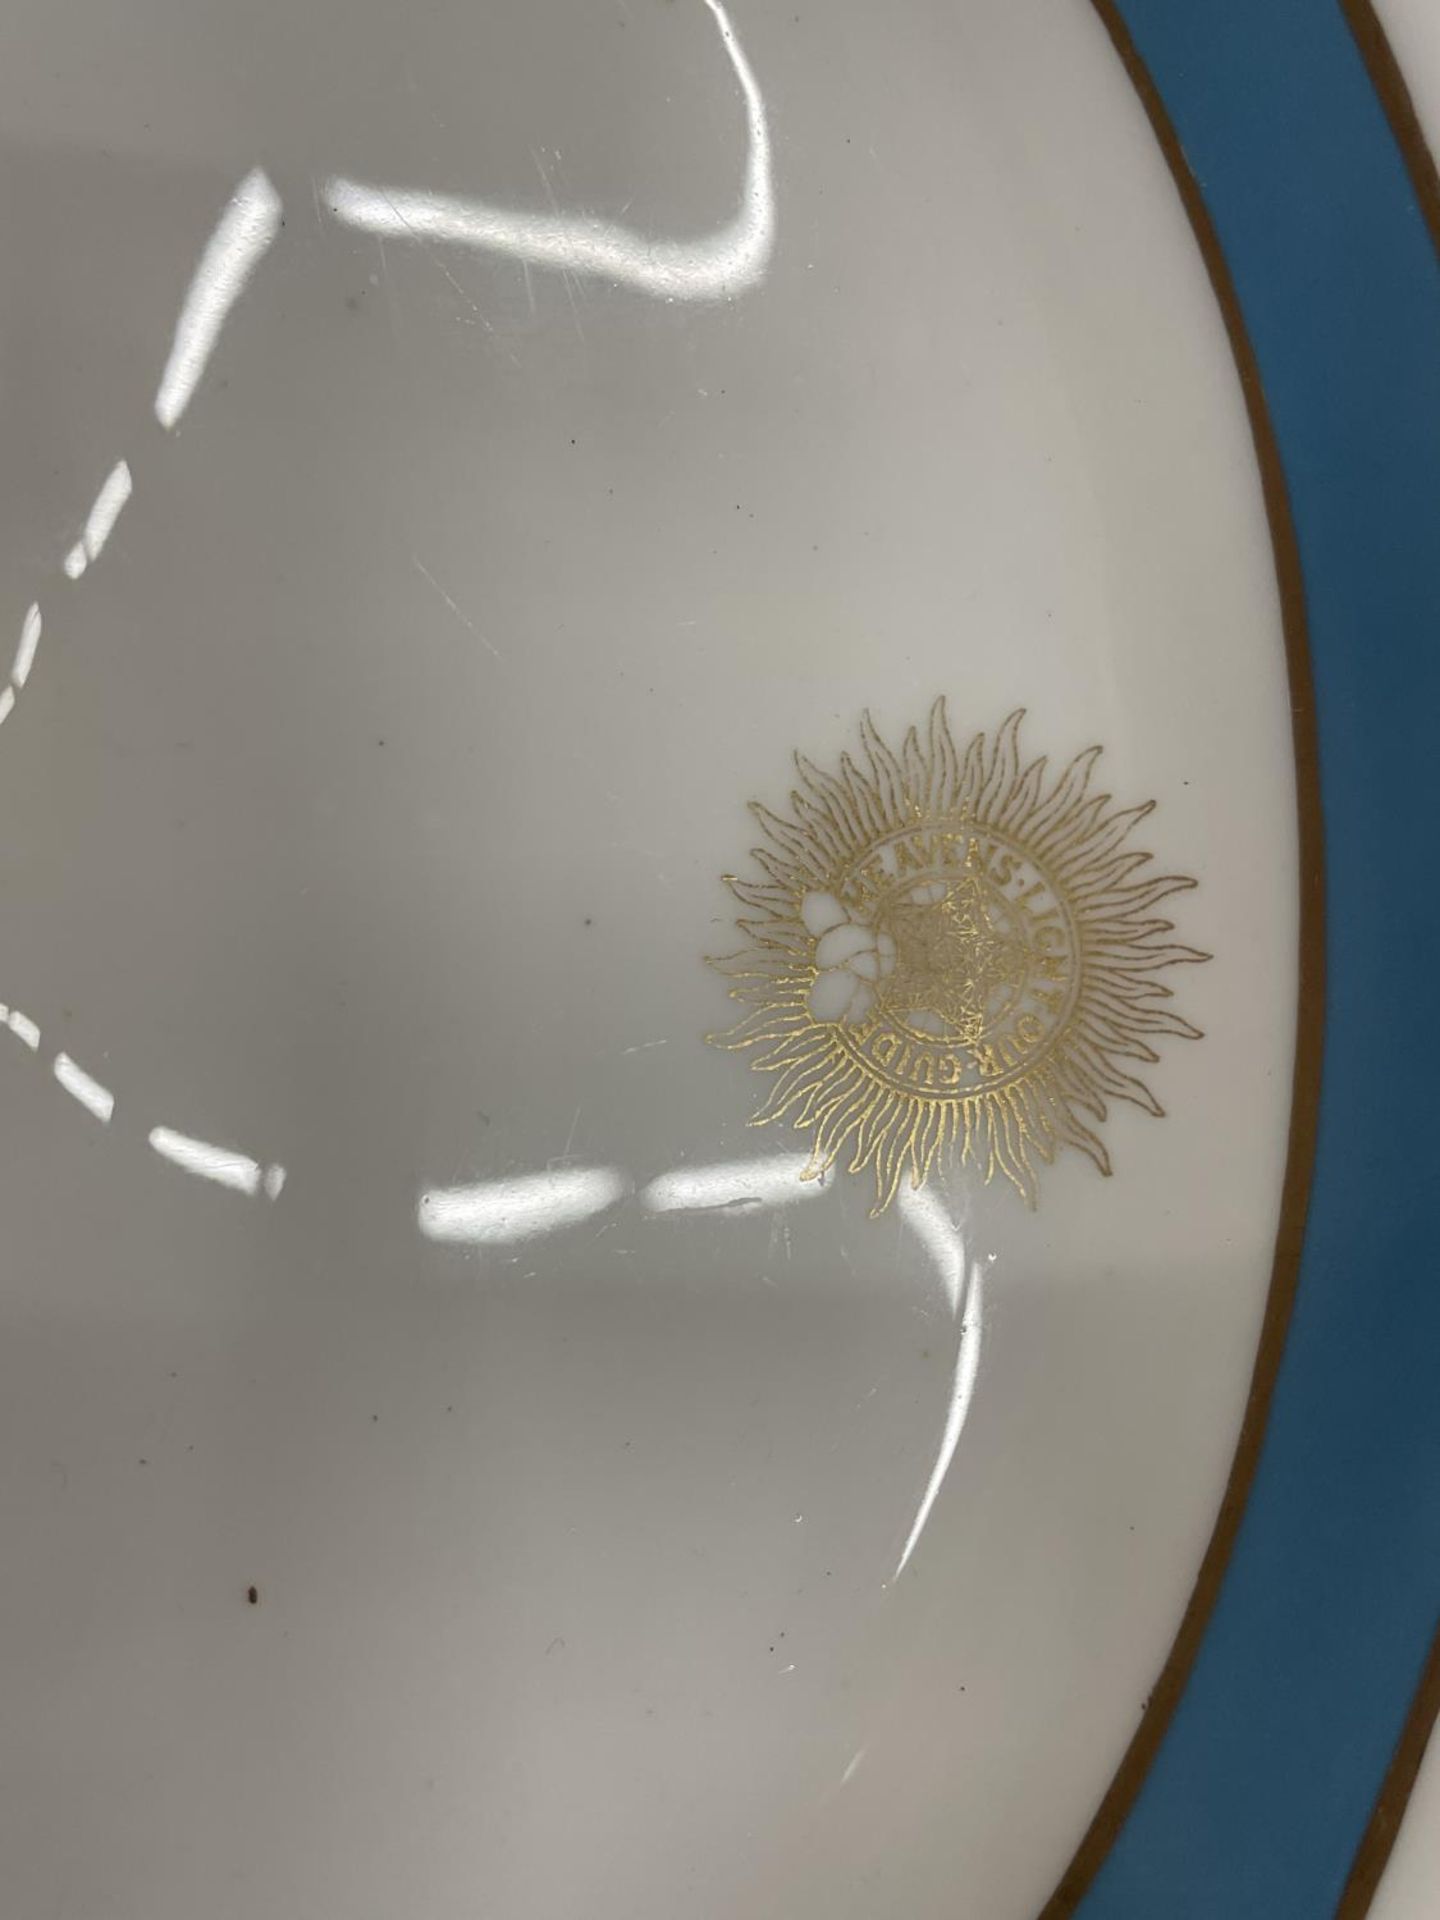 FIVE CROWN STAFFORDSHIRE CRESCENT SHAPED PLATES, WITH THE MOTTO 'HEAVENS LIGHT OUR GUIDE' - Image 2 of 4